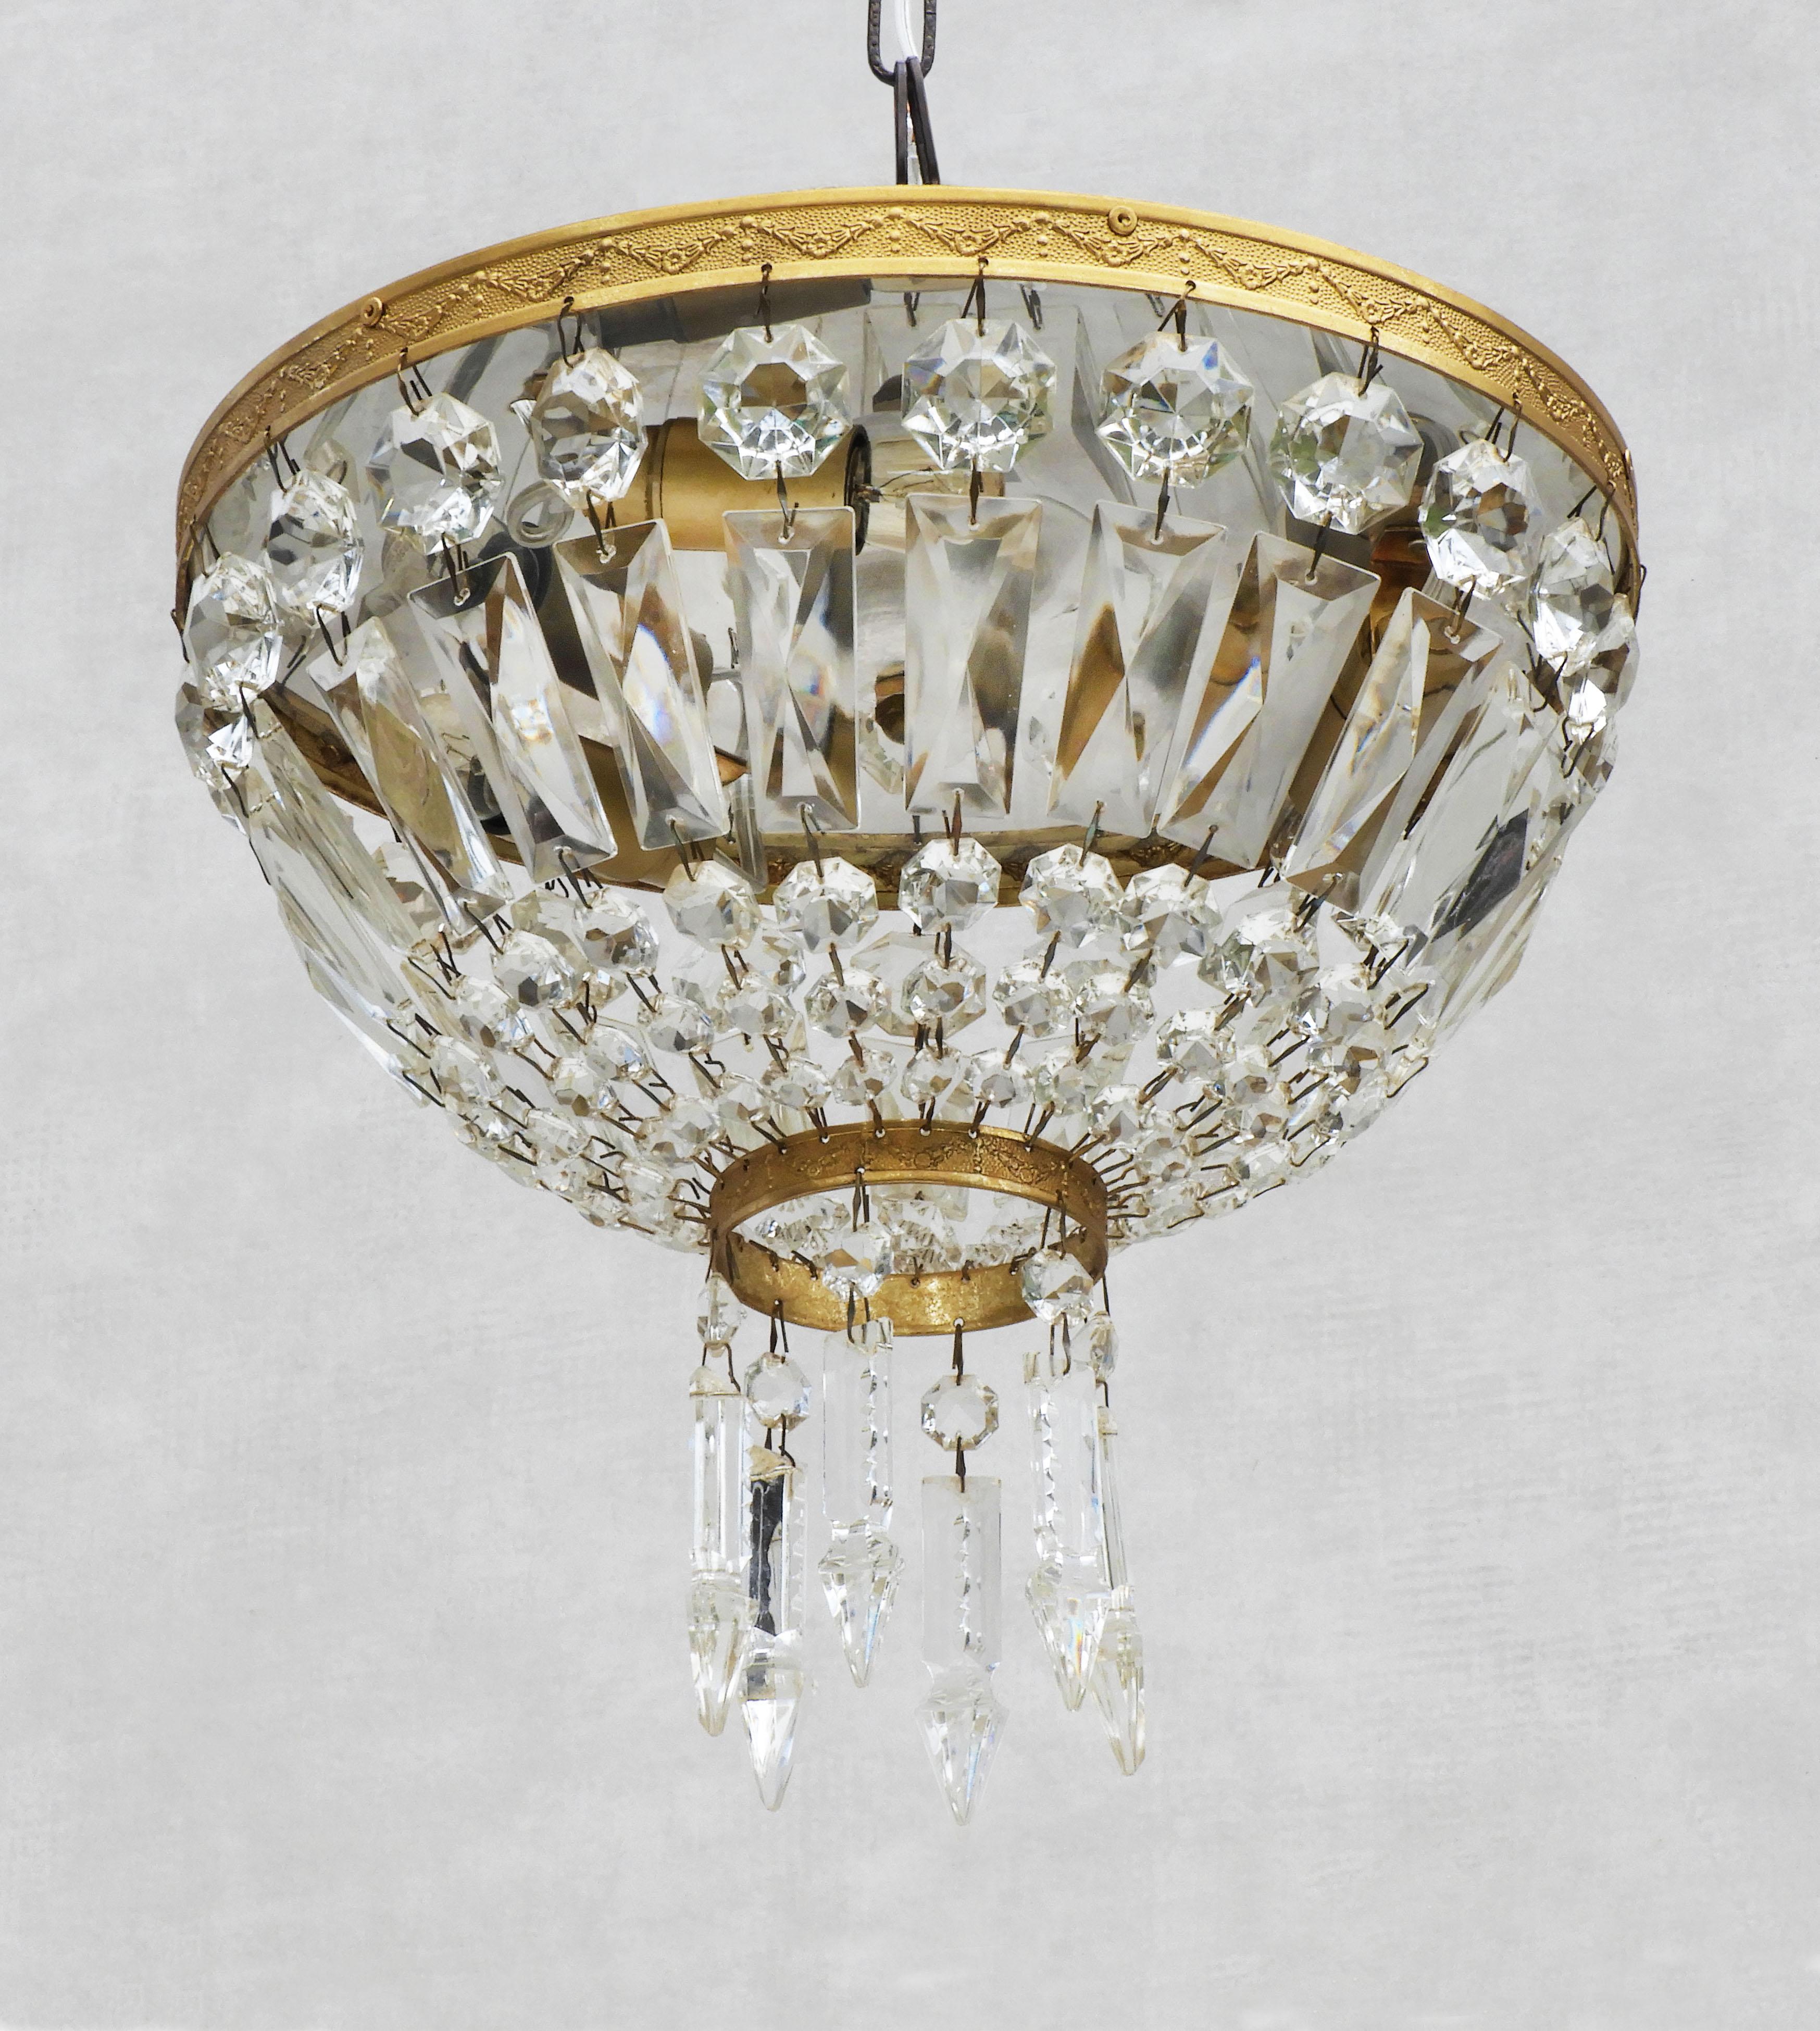 Elegant Mid-20th Century French flush mount chandelier. Multi-faceted strings of octagonal and rectangular crystal cut glass 'pampilles' suspended between gilded circular bands and finished with a fringe of arrow-shaped drops. 
In great vintage